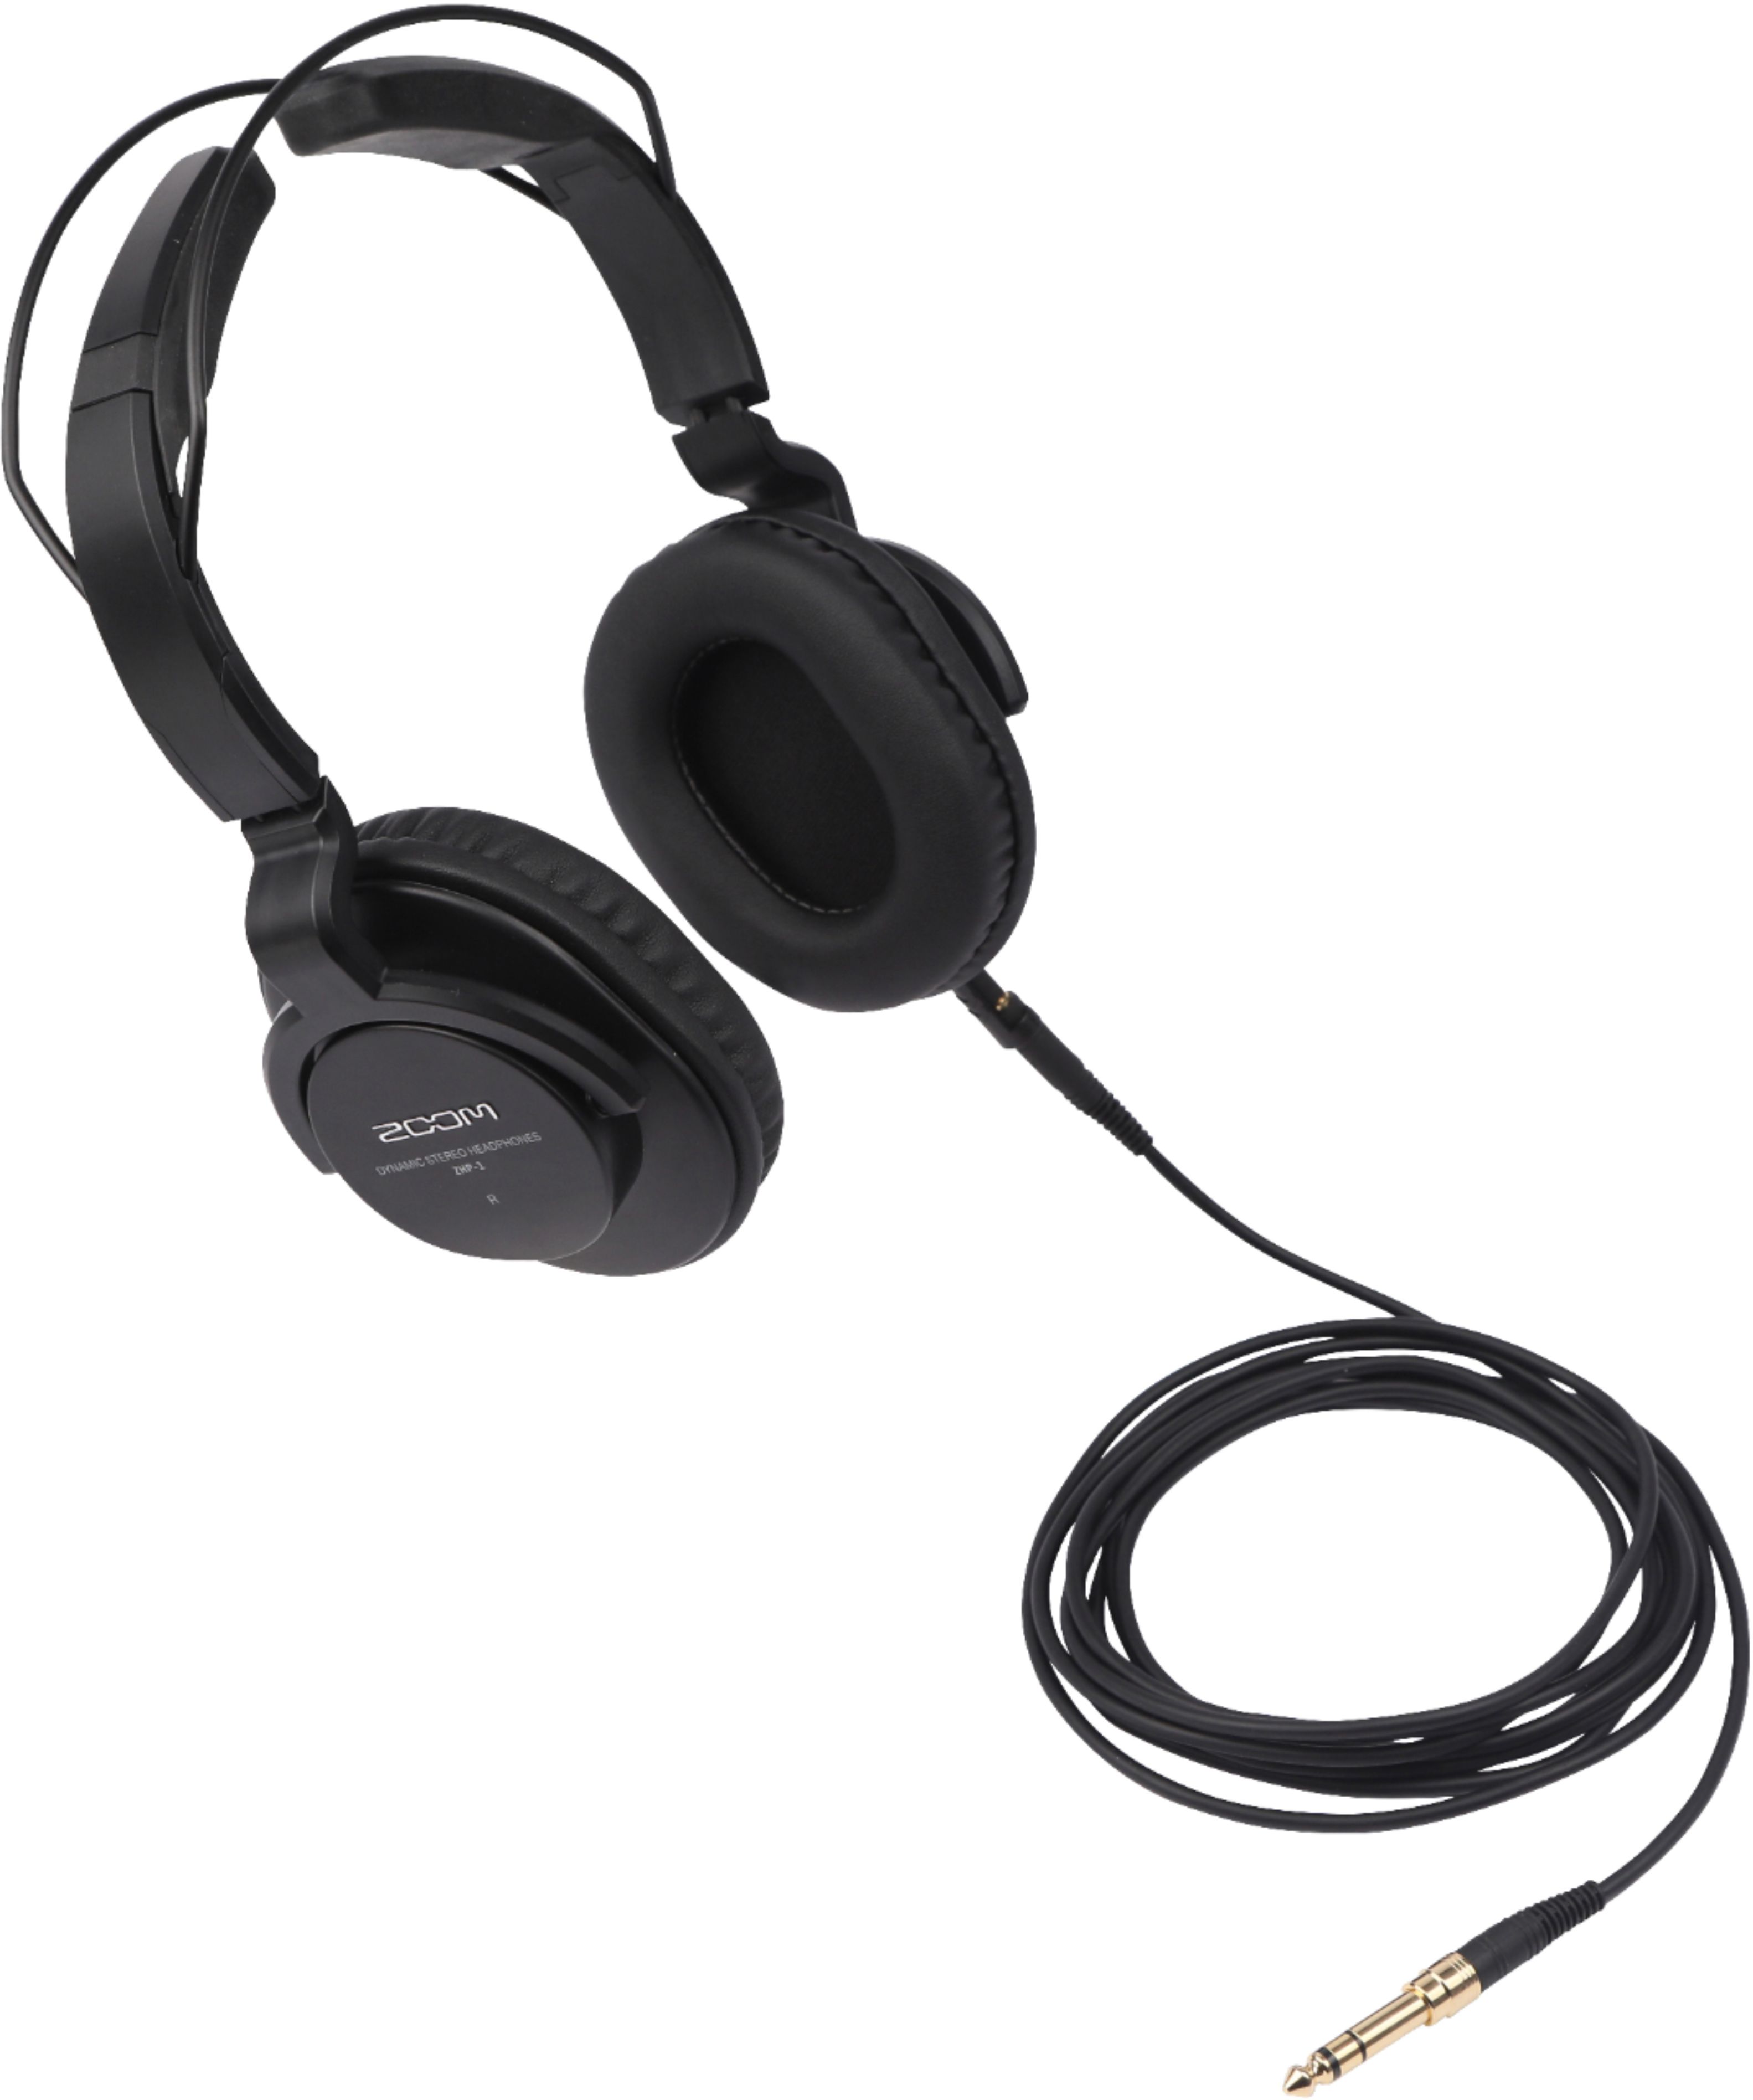 Zoom ZDM-1 Podcast Kit auriculares, paraviento, cable XLR y